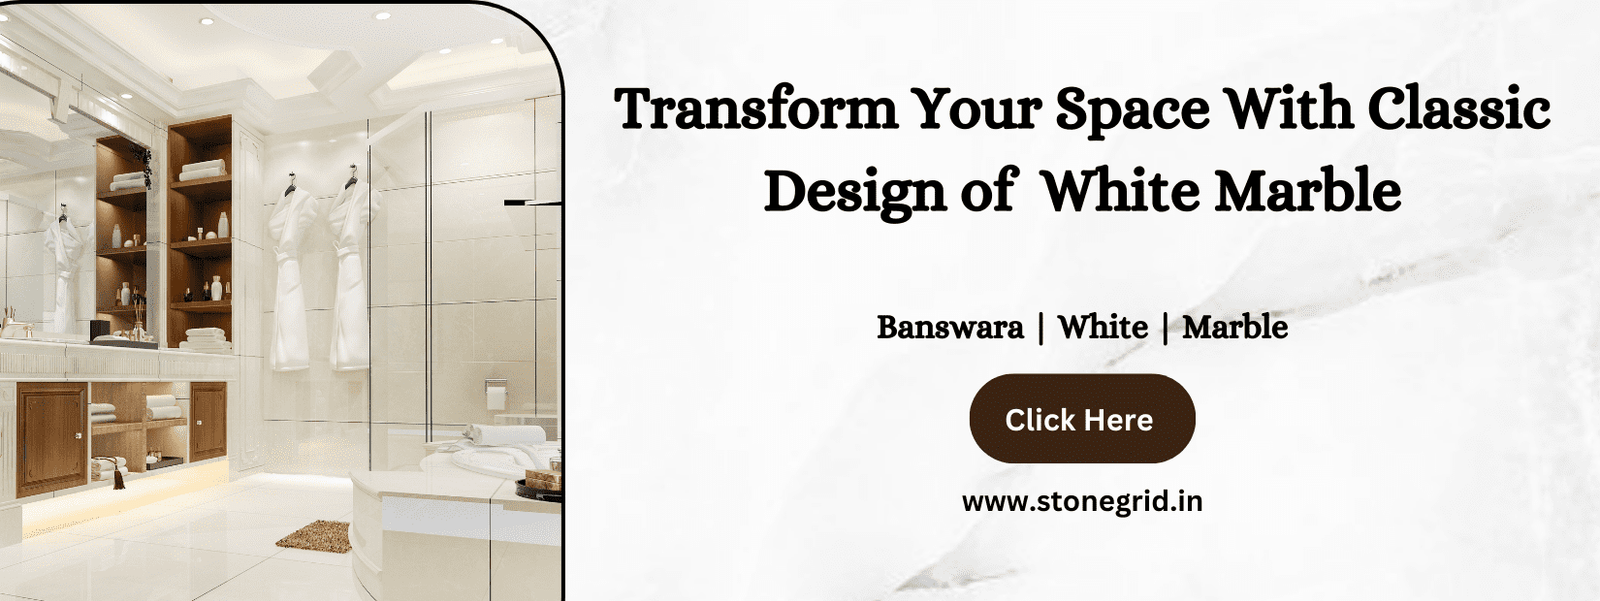 Transform-Your-Space-with-Classic-Design-of-White Marble